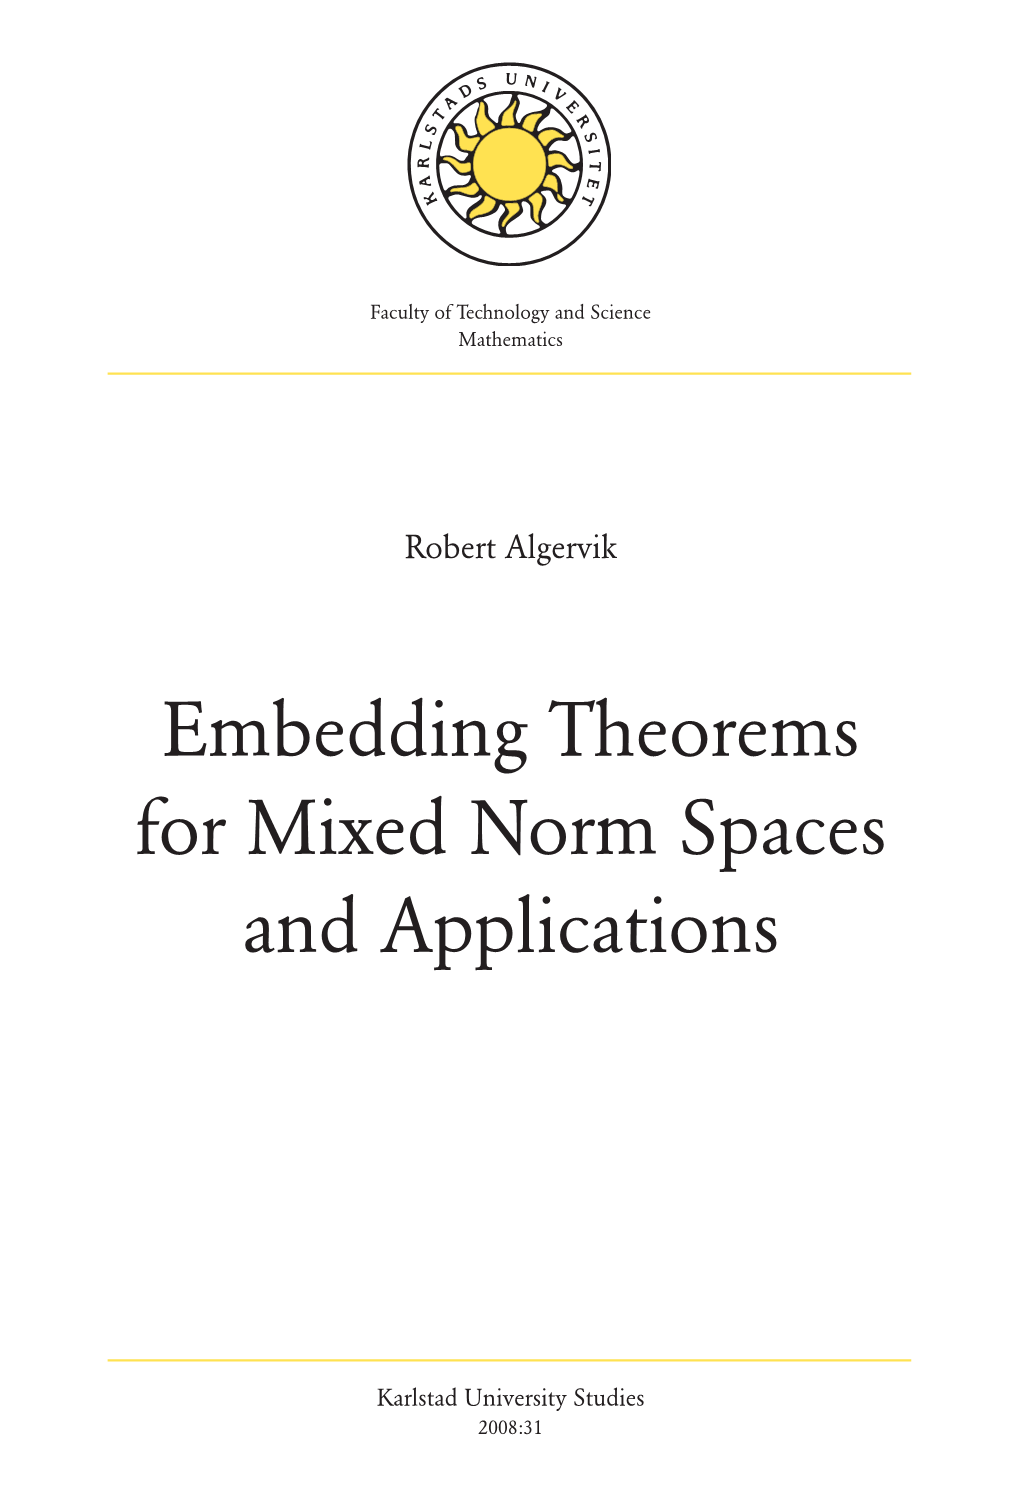 Embedding Theorems for Mixed Norm Spaces and Applications